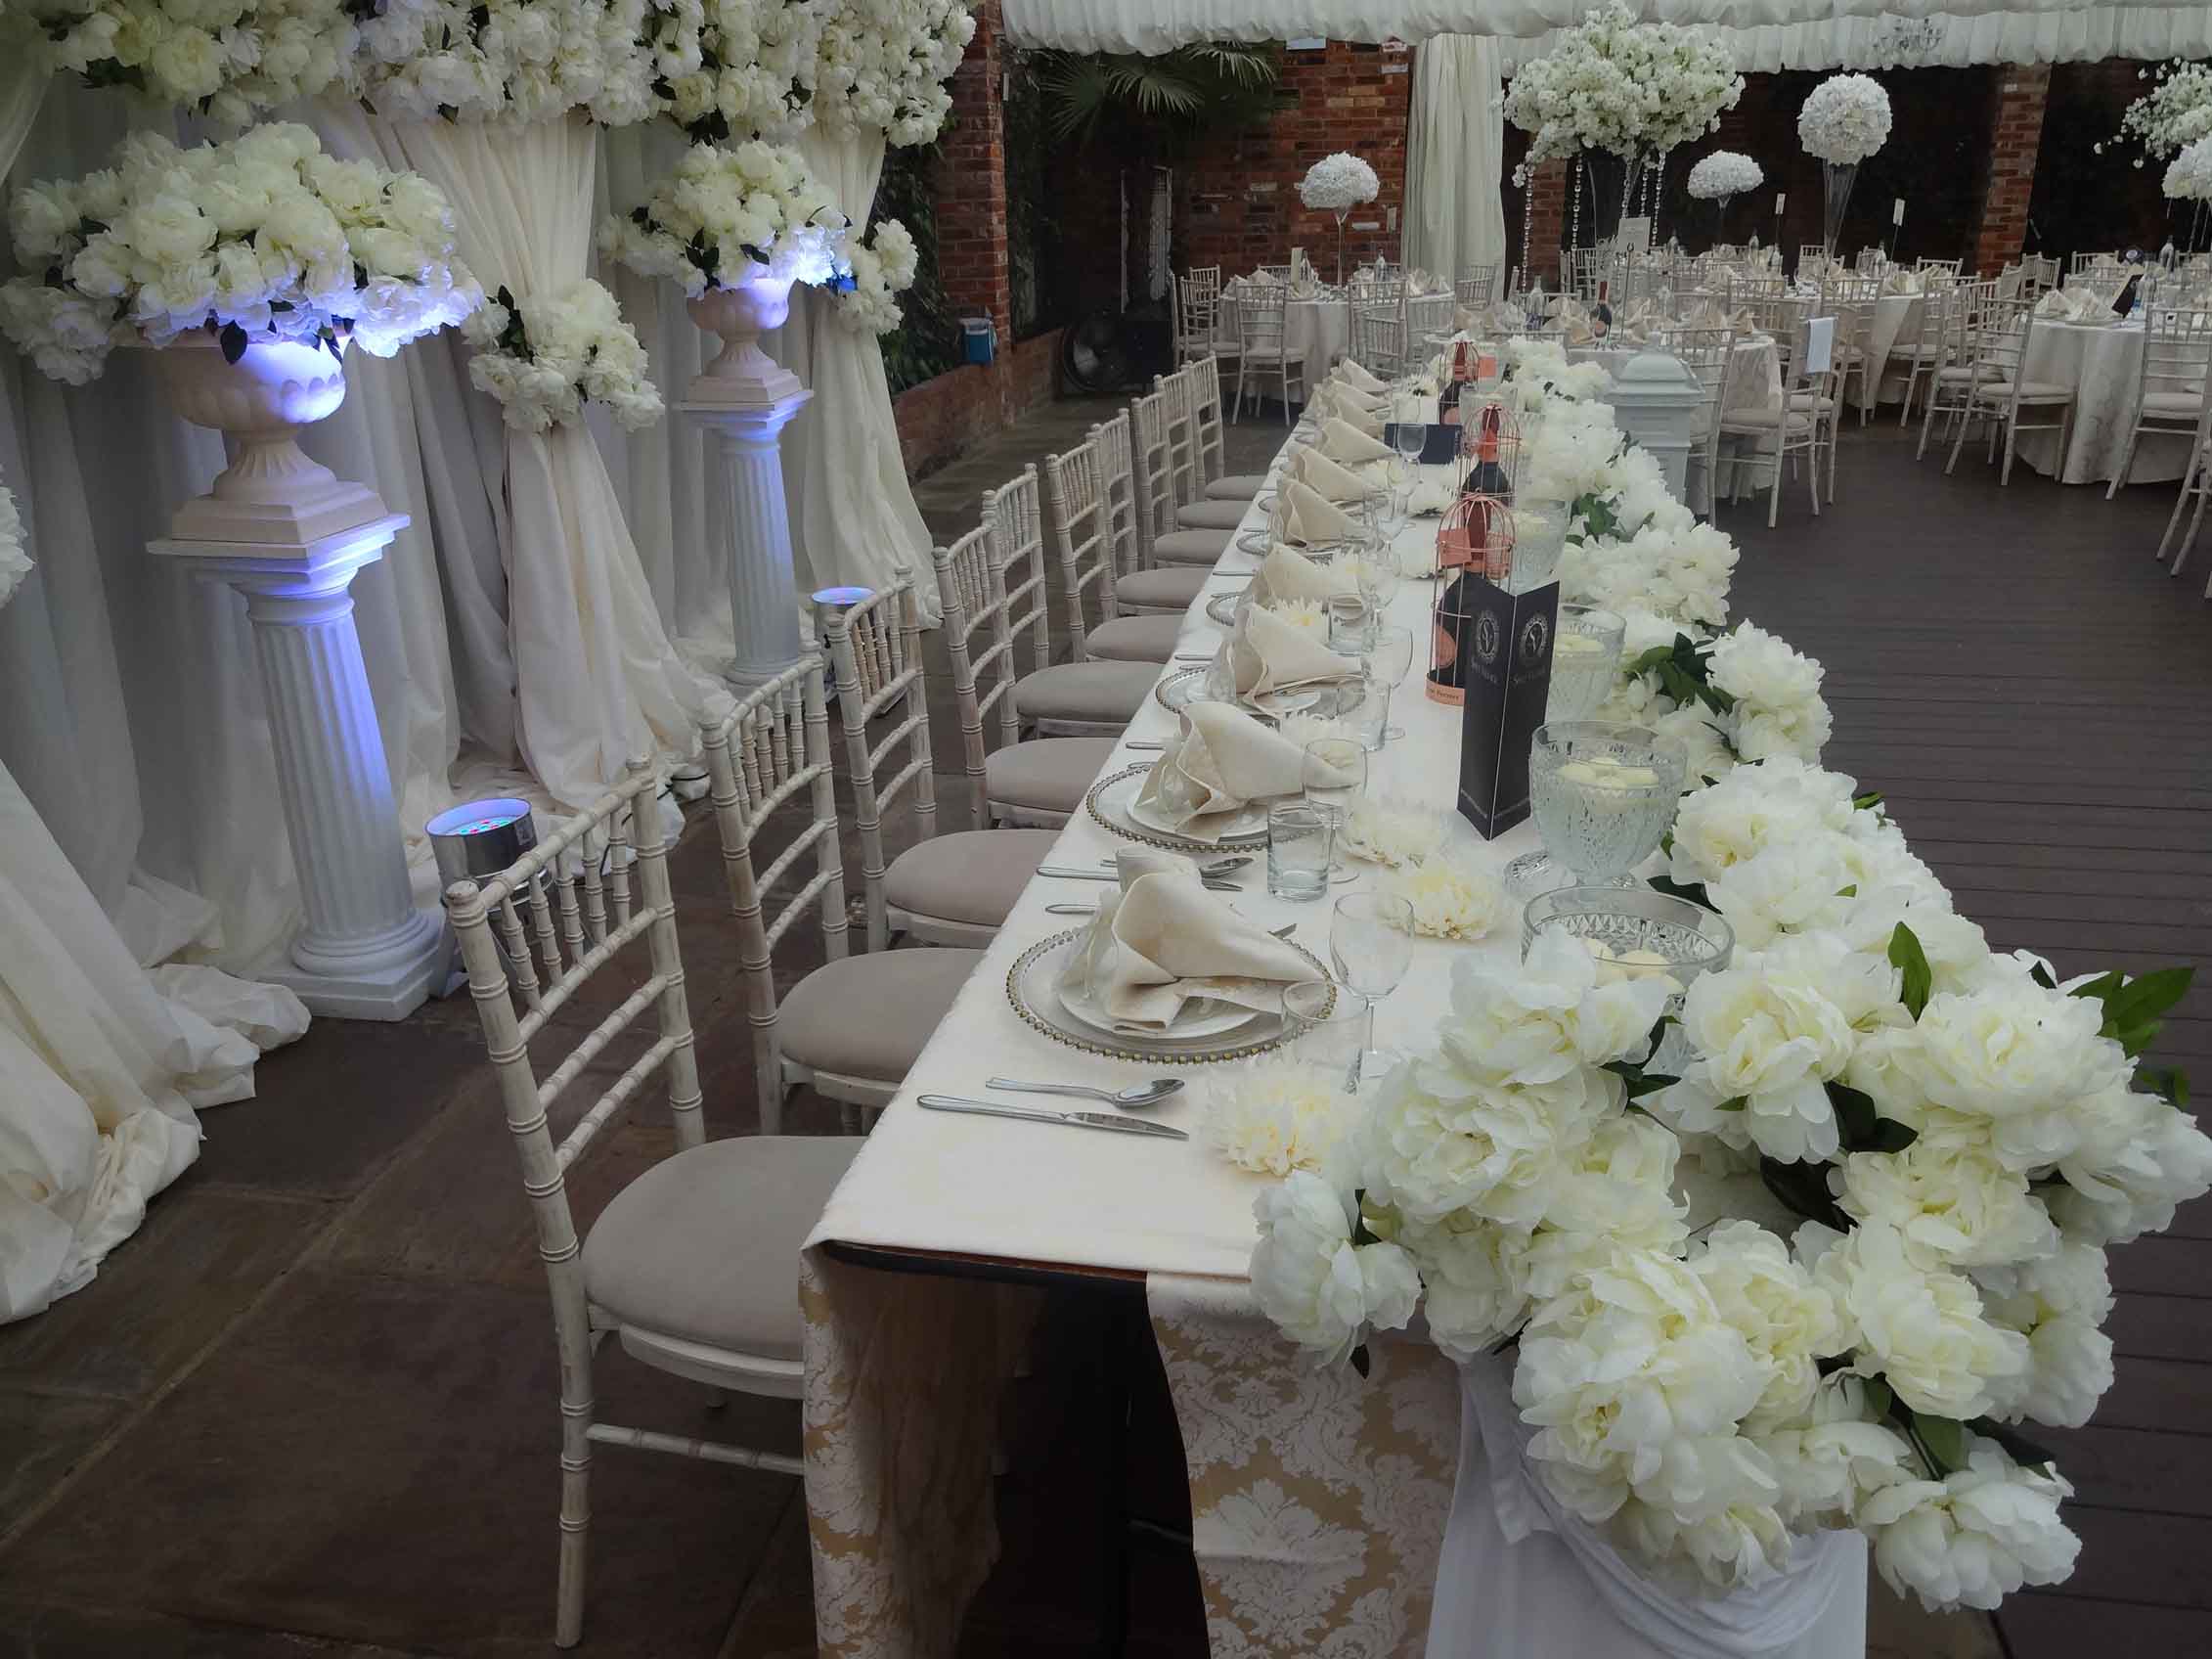 Luxury wedding decor at a reception in London, featuring lavish floral arrangements and steel pan band music, ideal for stylish wedding ideas.